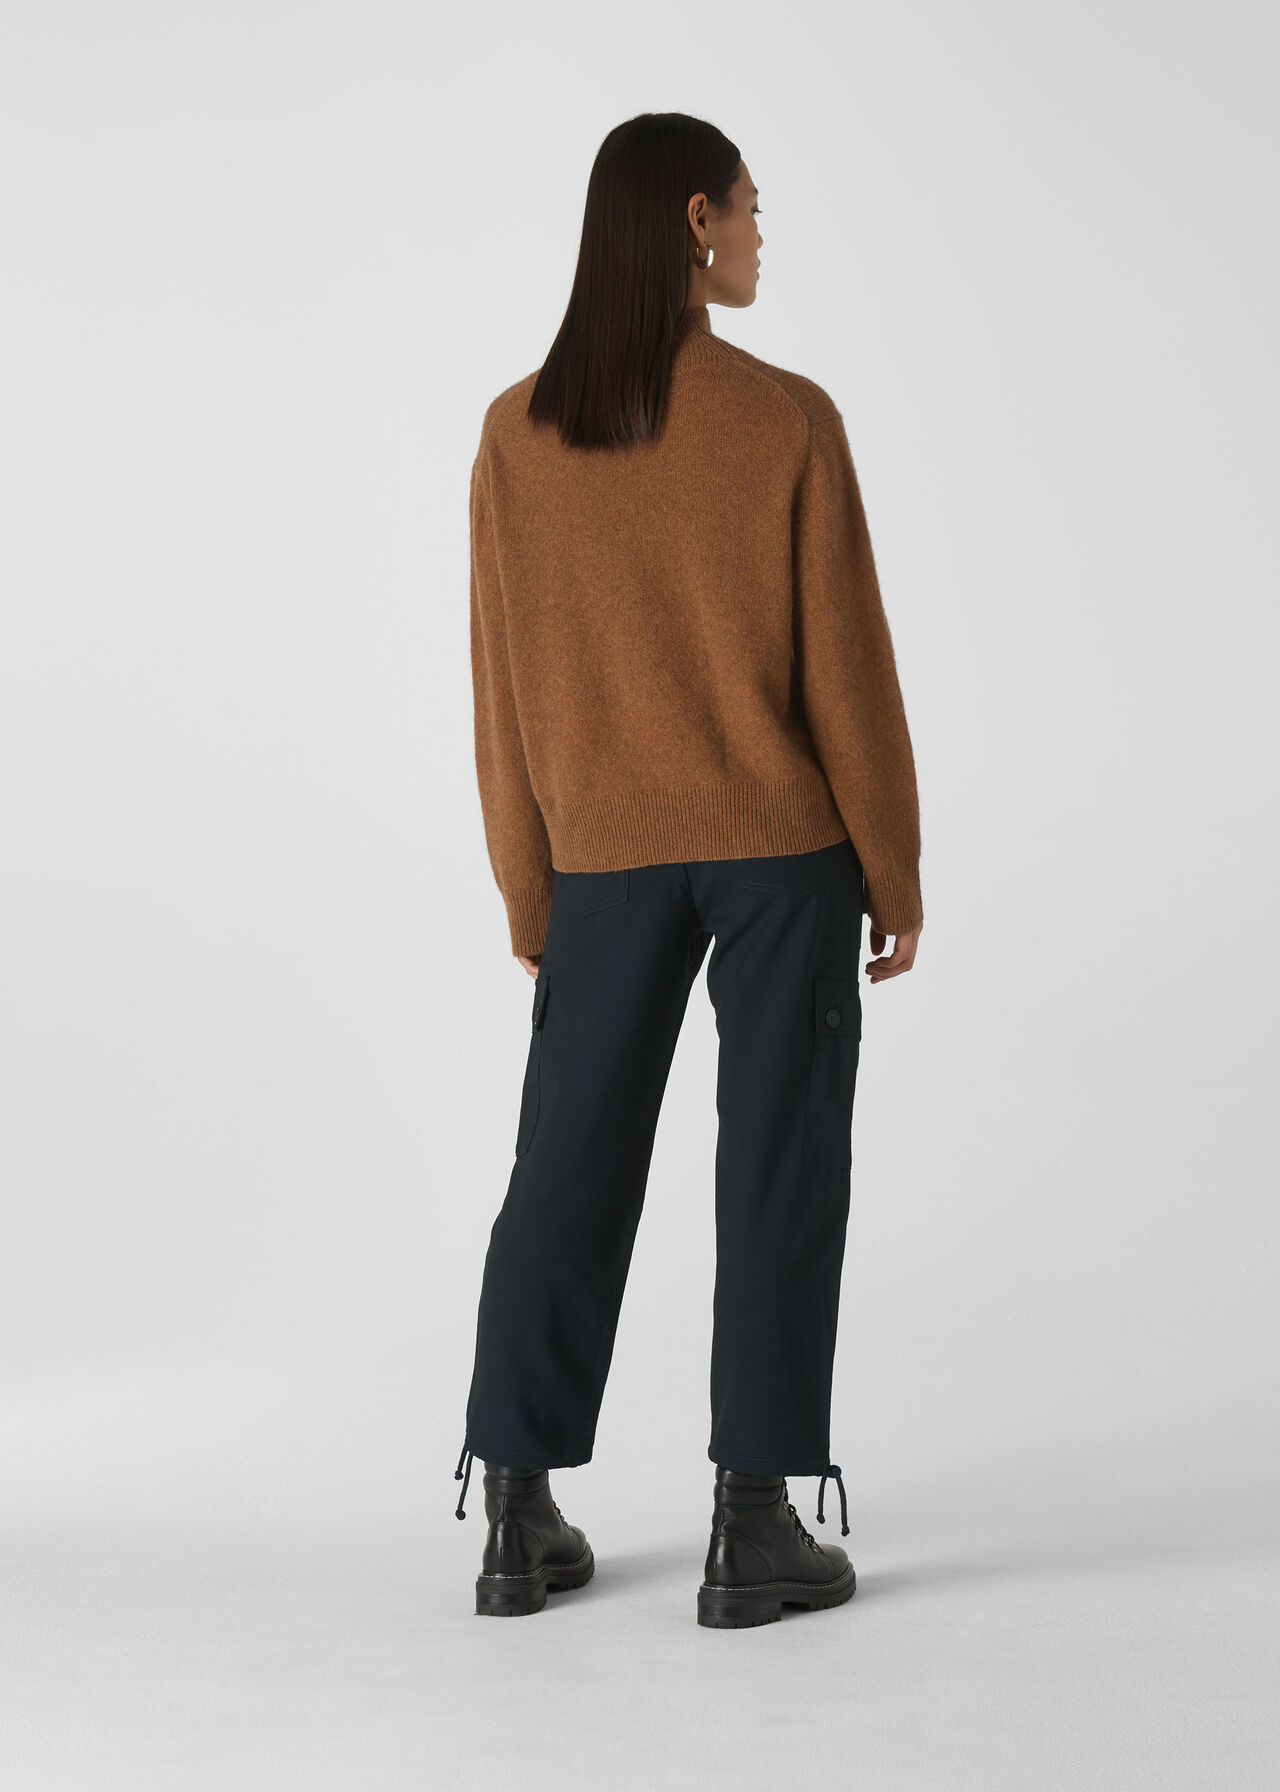 Olive Funnel Neck Yak Mix Knit | WHISTLES